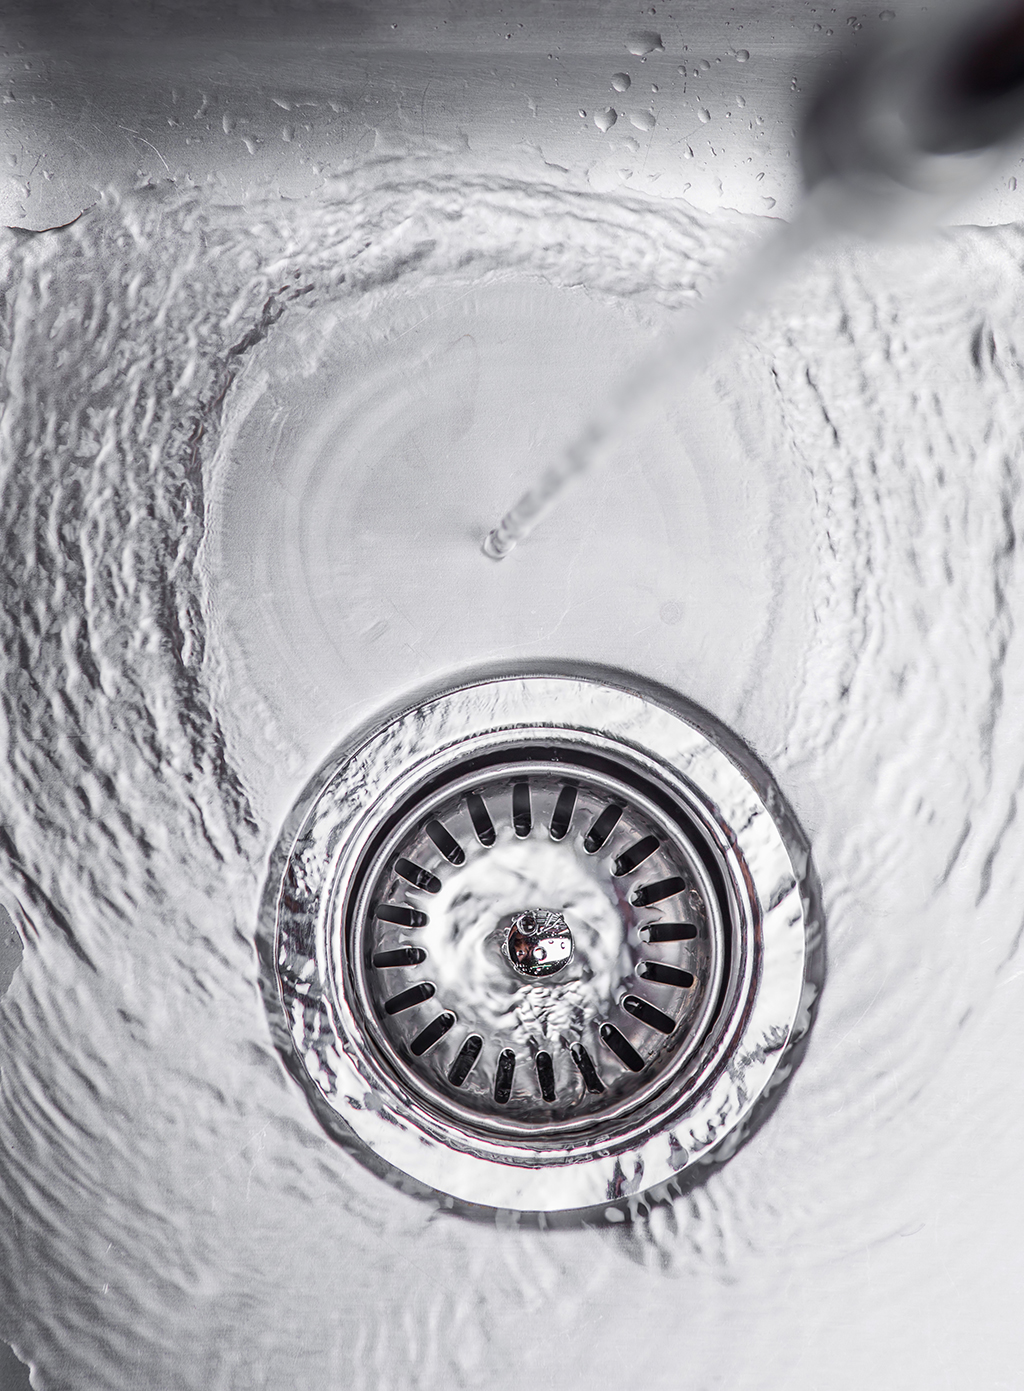 Drain Cleaning Service: There’s Nothing More Satisfying to a Plumber Than a Drain That Runs Clear | Henderson, NV